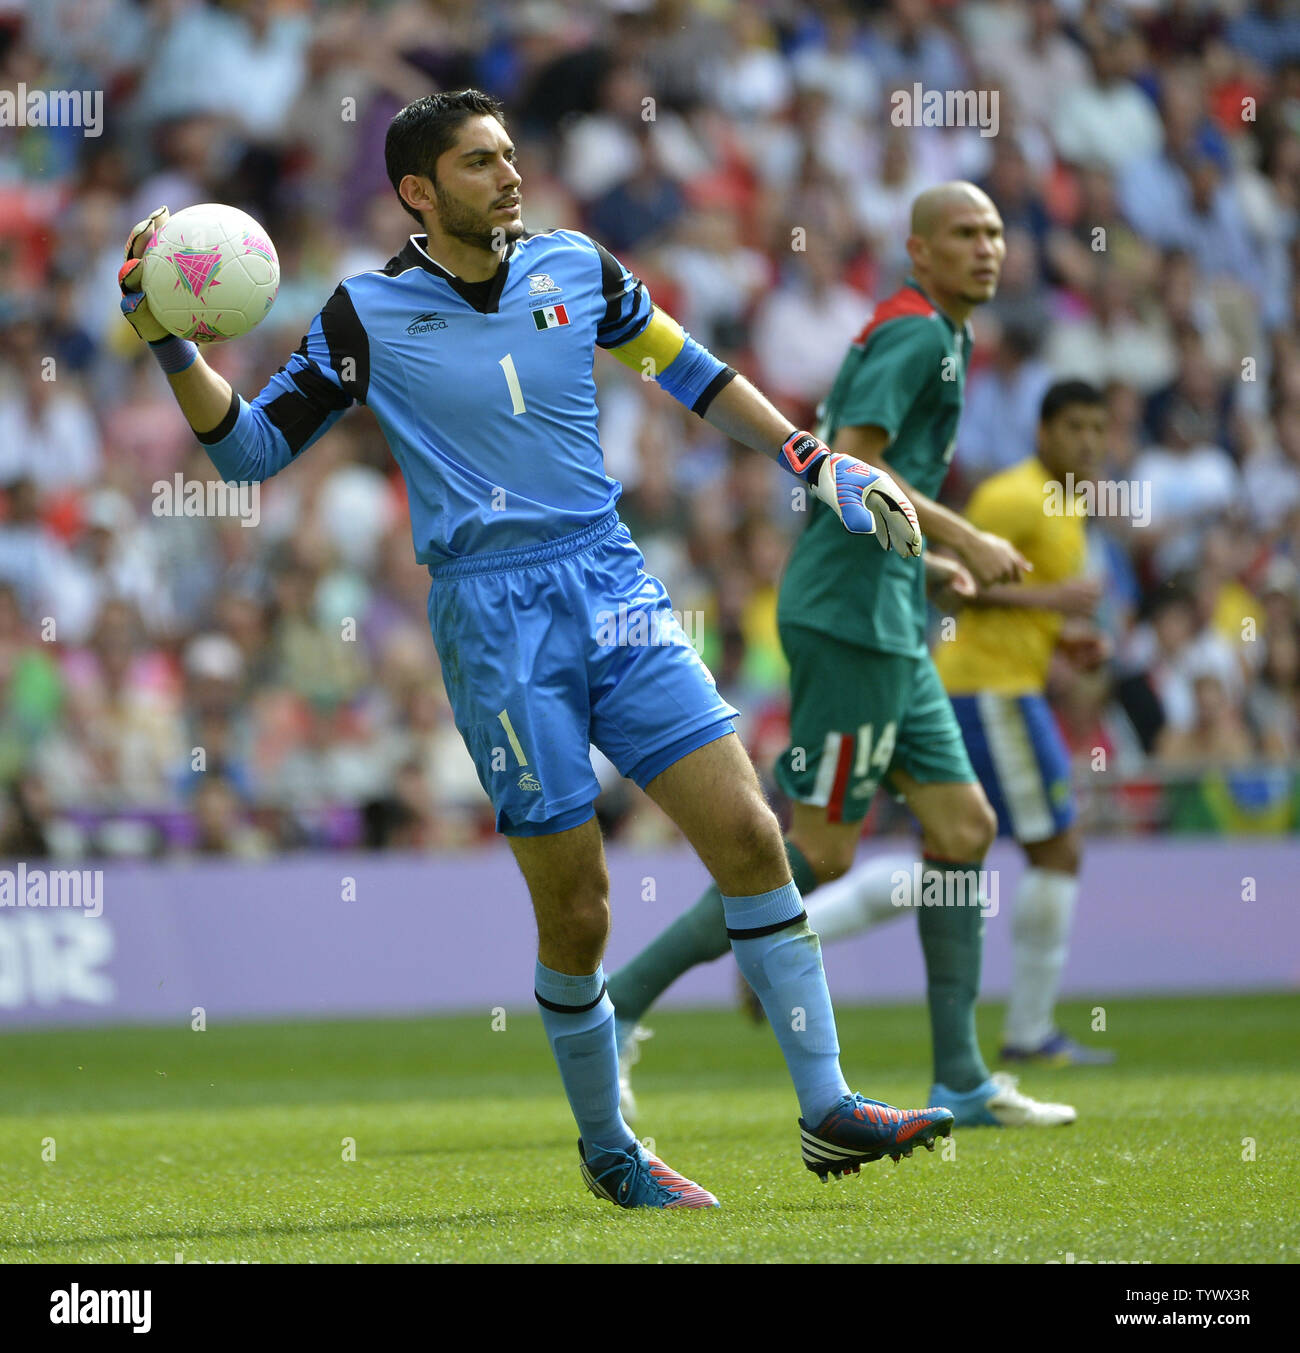 Goalkeeper Jose Corona of Mexico handles the ball during the second half of the Gold Medal Football Match against Braxzil at the London 2012 Summer Olympics on August 11, 2012 at Wembley Stadium, London. Mexico defeated Brazil 2-1 to win the Gold Medal.      UPI/Brian Kersey Stock Photo